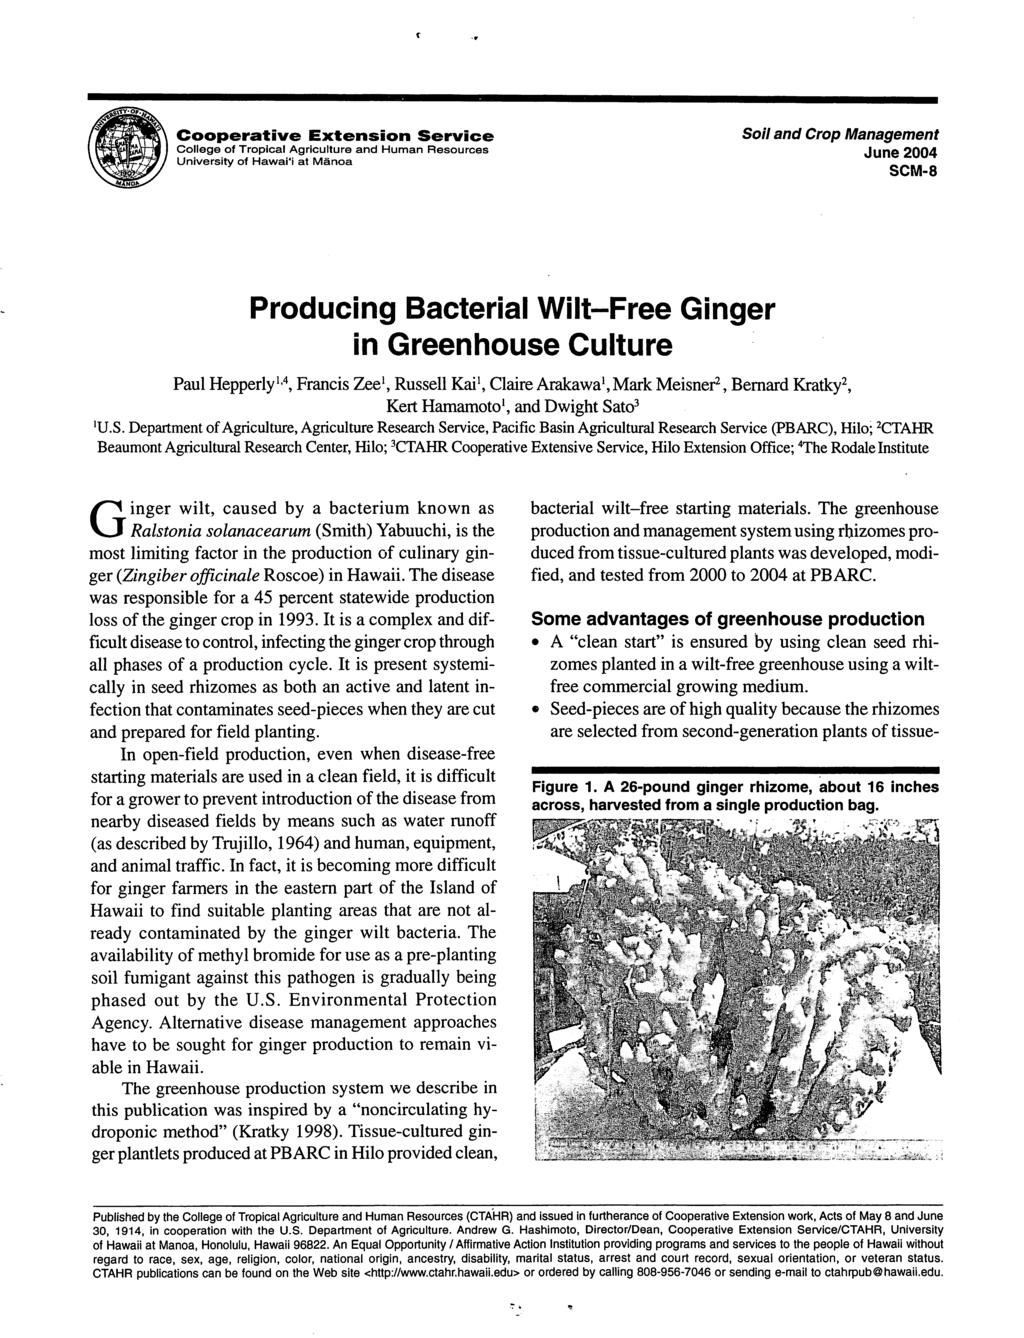 Cooperative Extension Service College of Tropical Agriculture and Human Resources University of Hawai'i at Manoa So/7 and Crop Management June 2004 SCM-8 Producing Bacterial Wilt-Free Ginger in